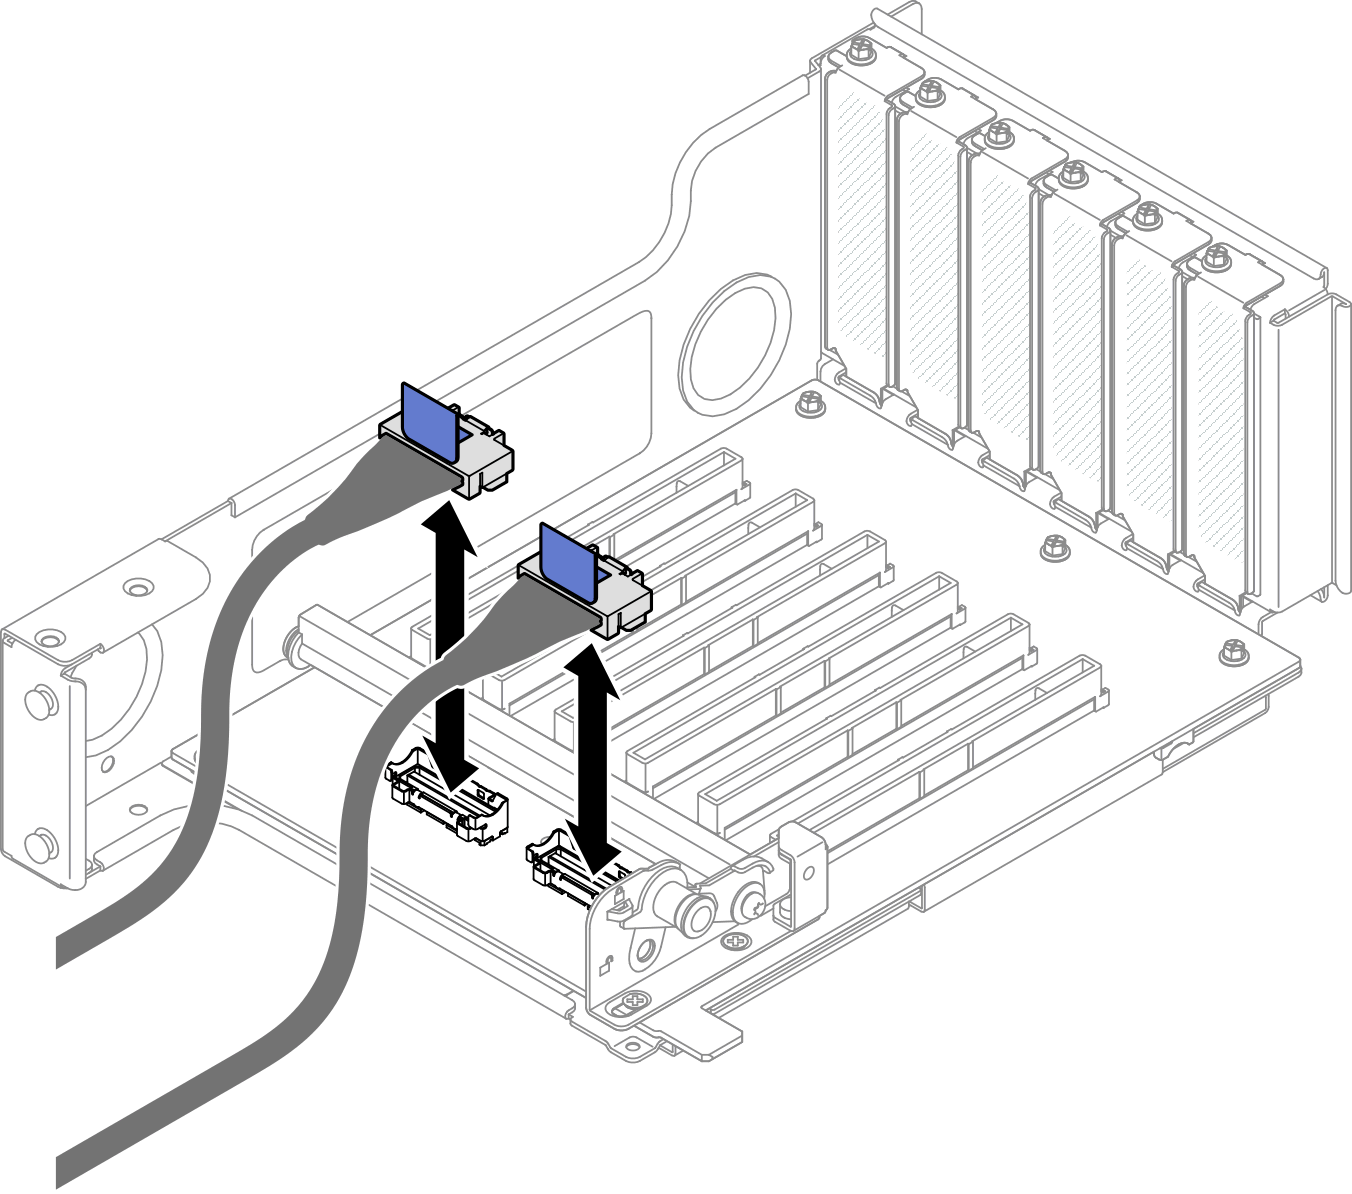 Connecting PCIe riser cables to inside of riser